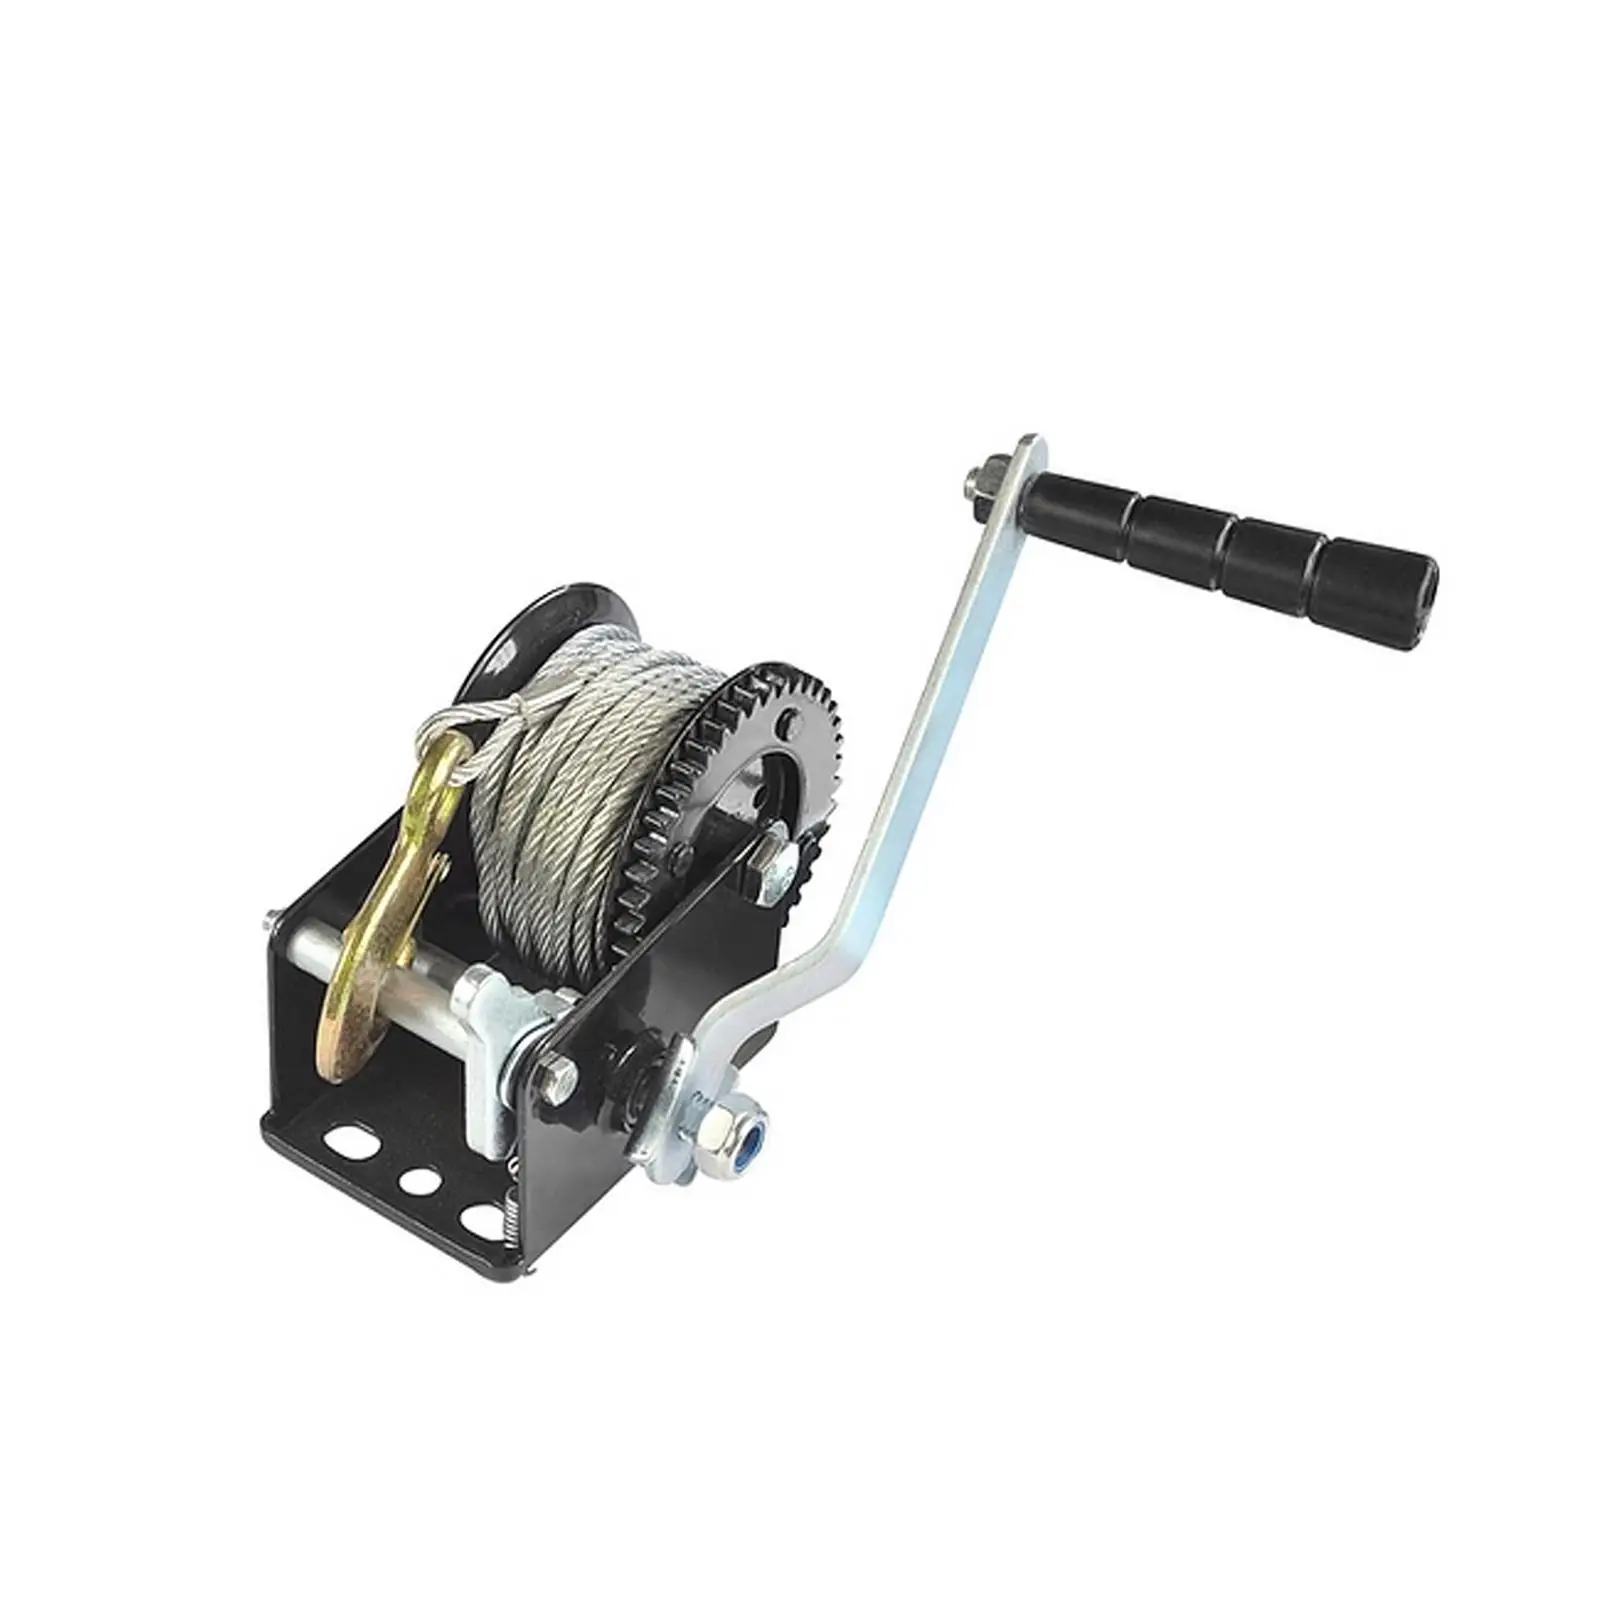 Manual Hand Winch 800lbs Replacement Parts with Rope Practical Repair Fittings Simple to Use Cable Trailer Winch for Motorhomes